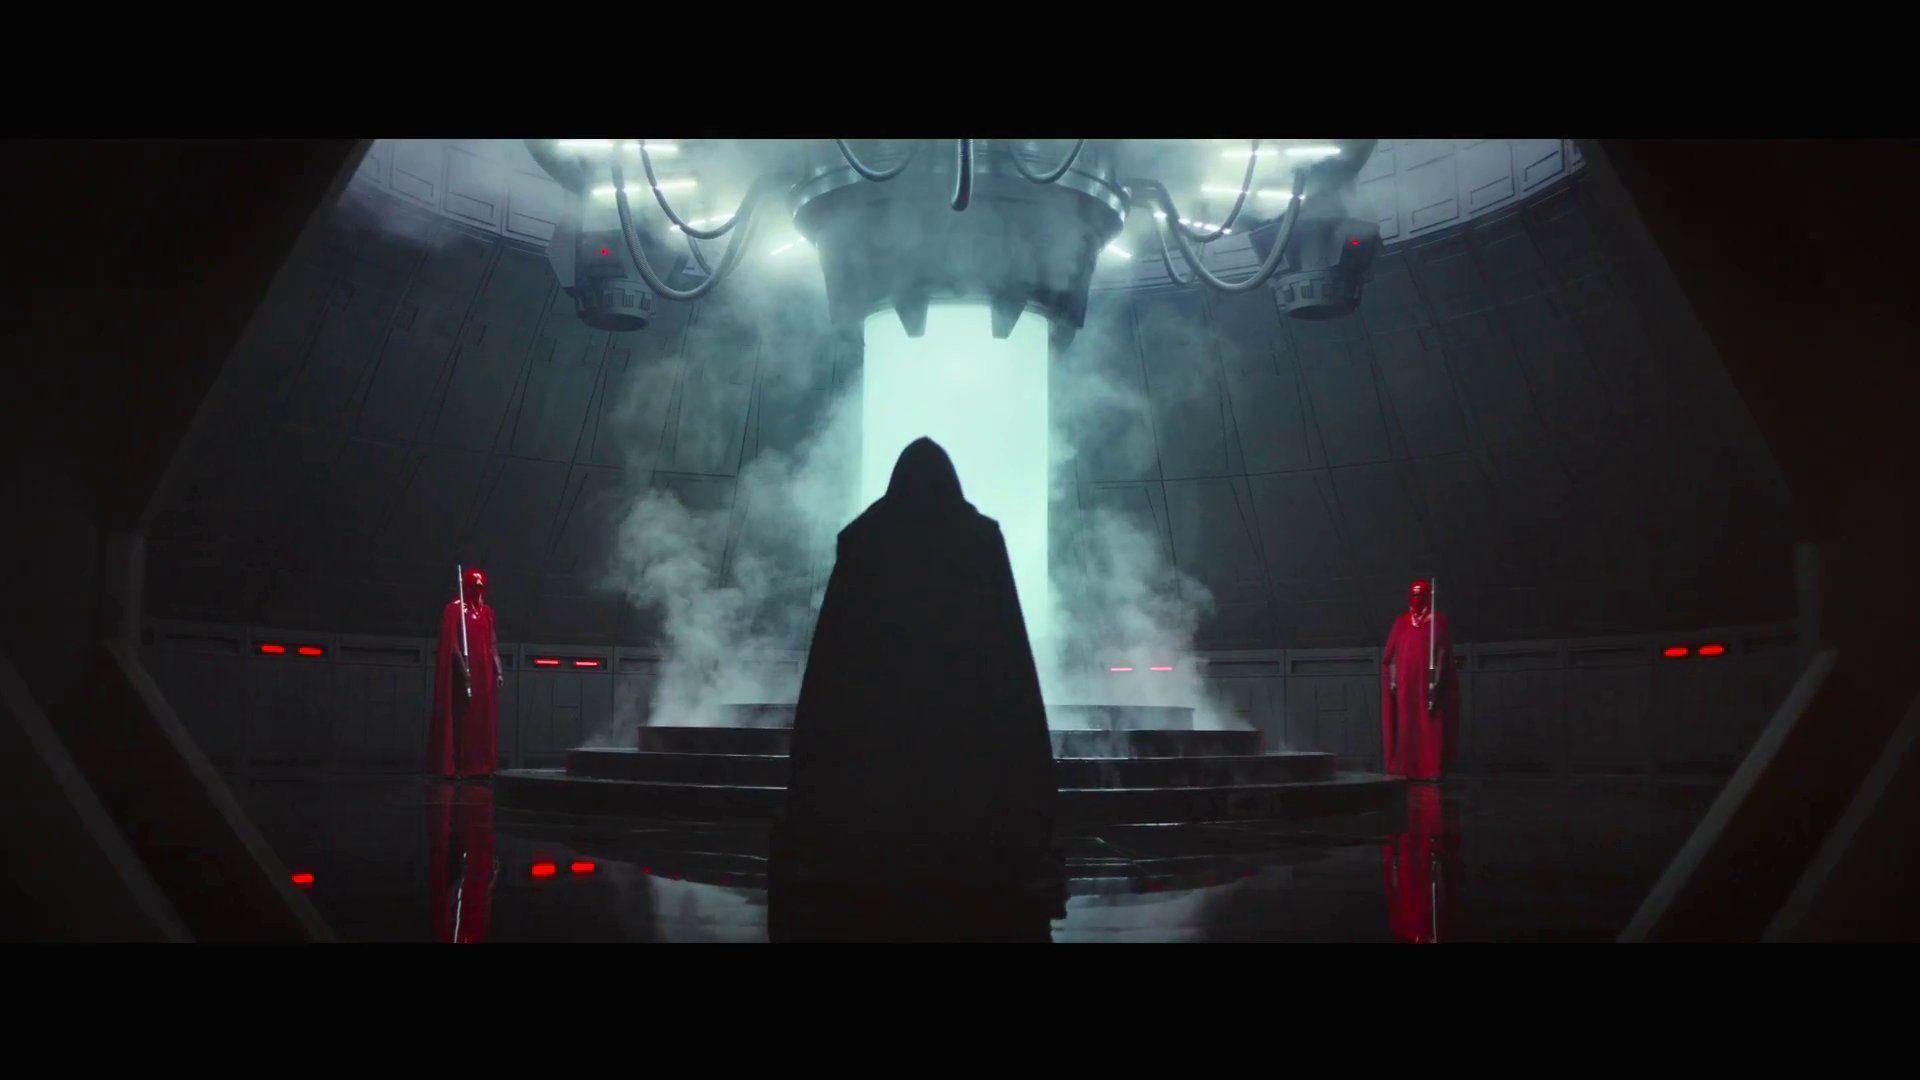 Over 40 Screenshots from the Rogue One Teaser Trailer